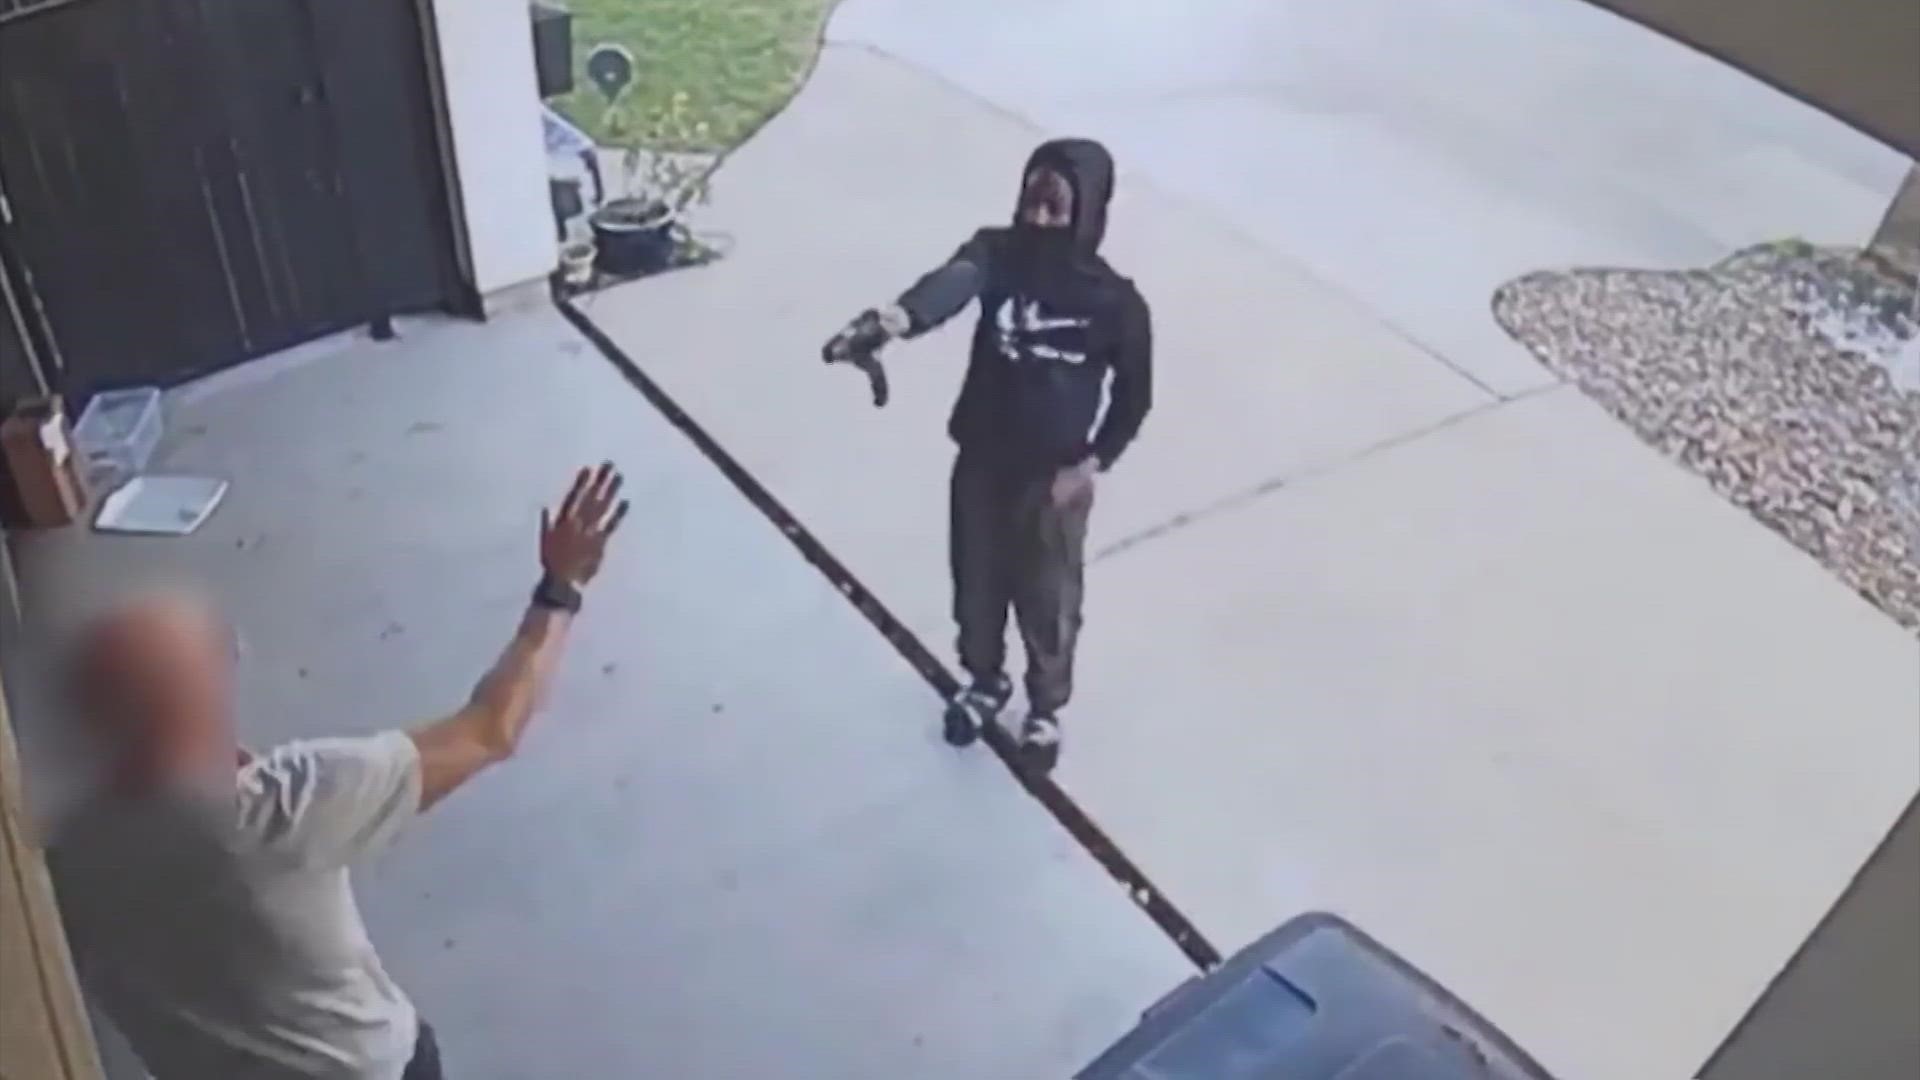 Video shows two men try to steal a man's SUV from his driveway, but police say when the suspect tried to drive off, he couldn't because his accomplice took the keys.